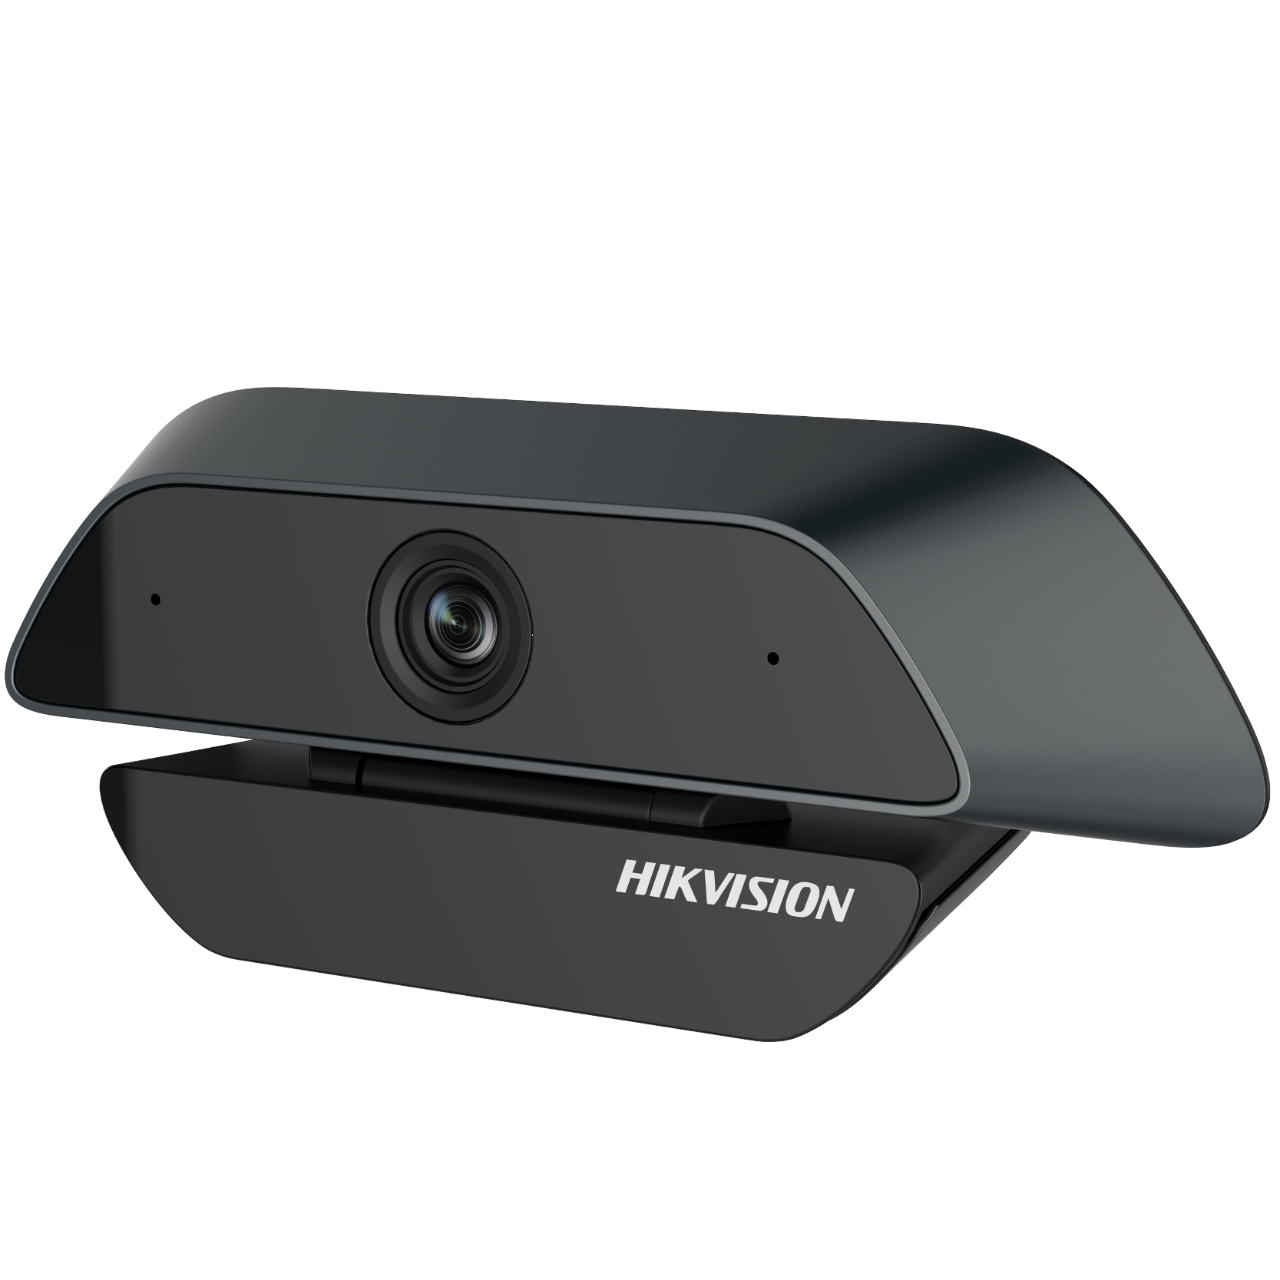 Веб-камера Hikvision DS-U12 (2MP CMOS Sensor0.1Lux @ (F1.2,AGC ON),Built-in Mic,USB 2.0,19201080@30/25fps,3.6mm Fixed Lens, кабель 2м, Windows 7/10, Android, Linux, macOS)